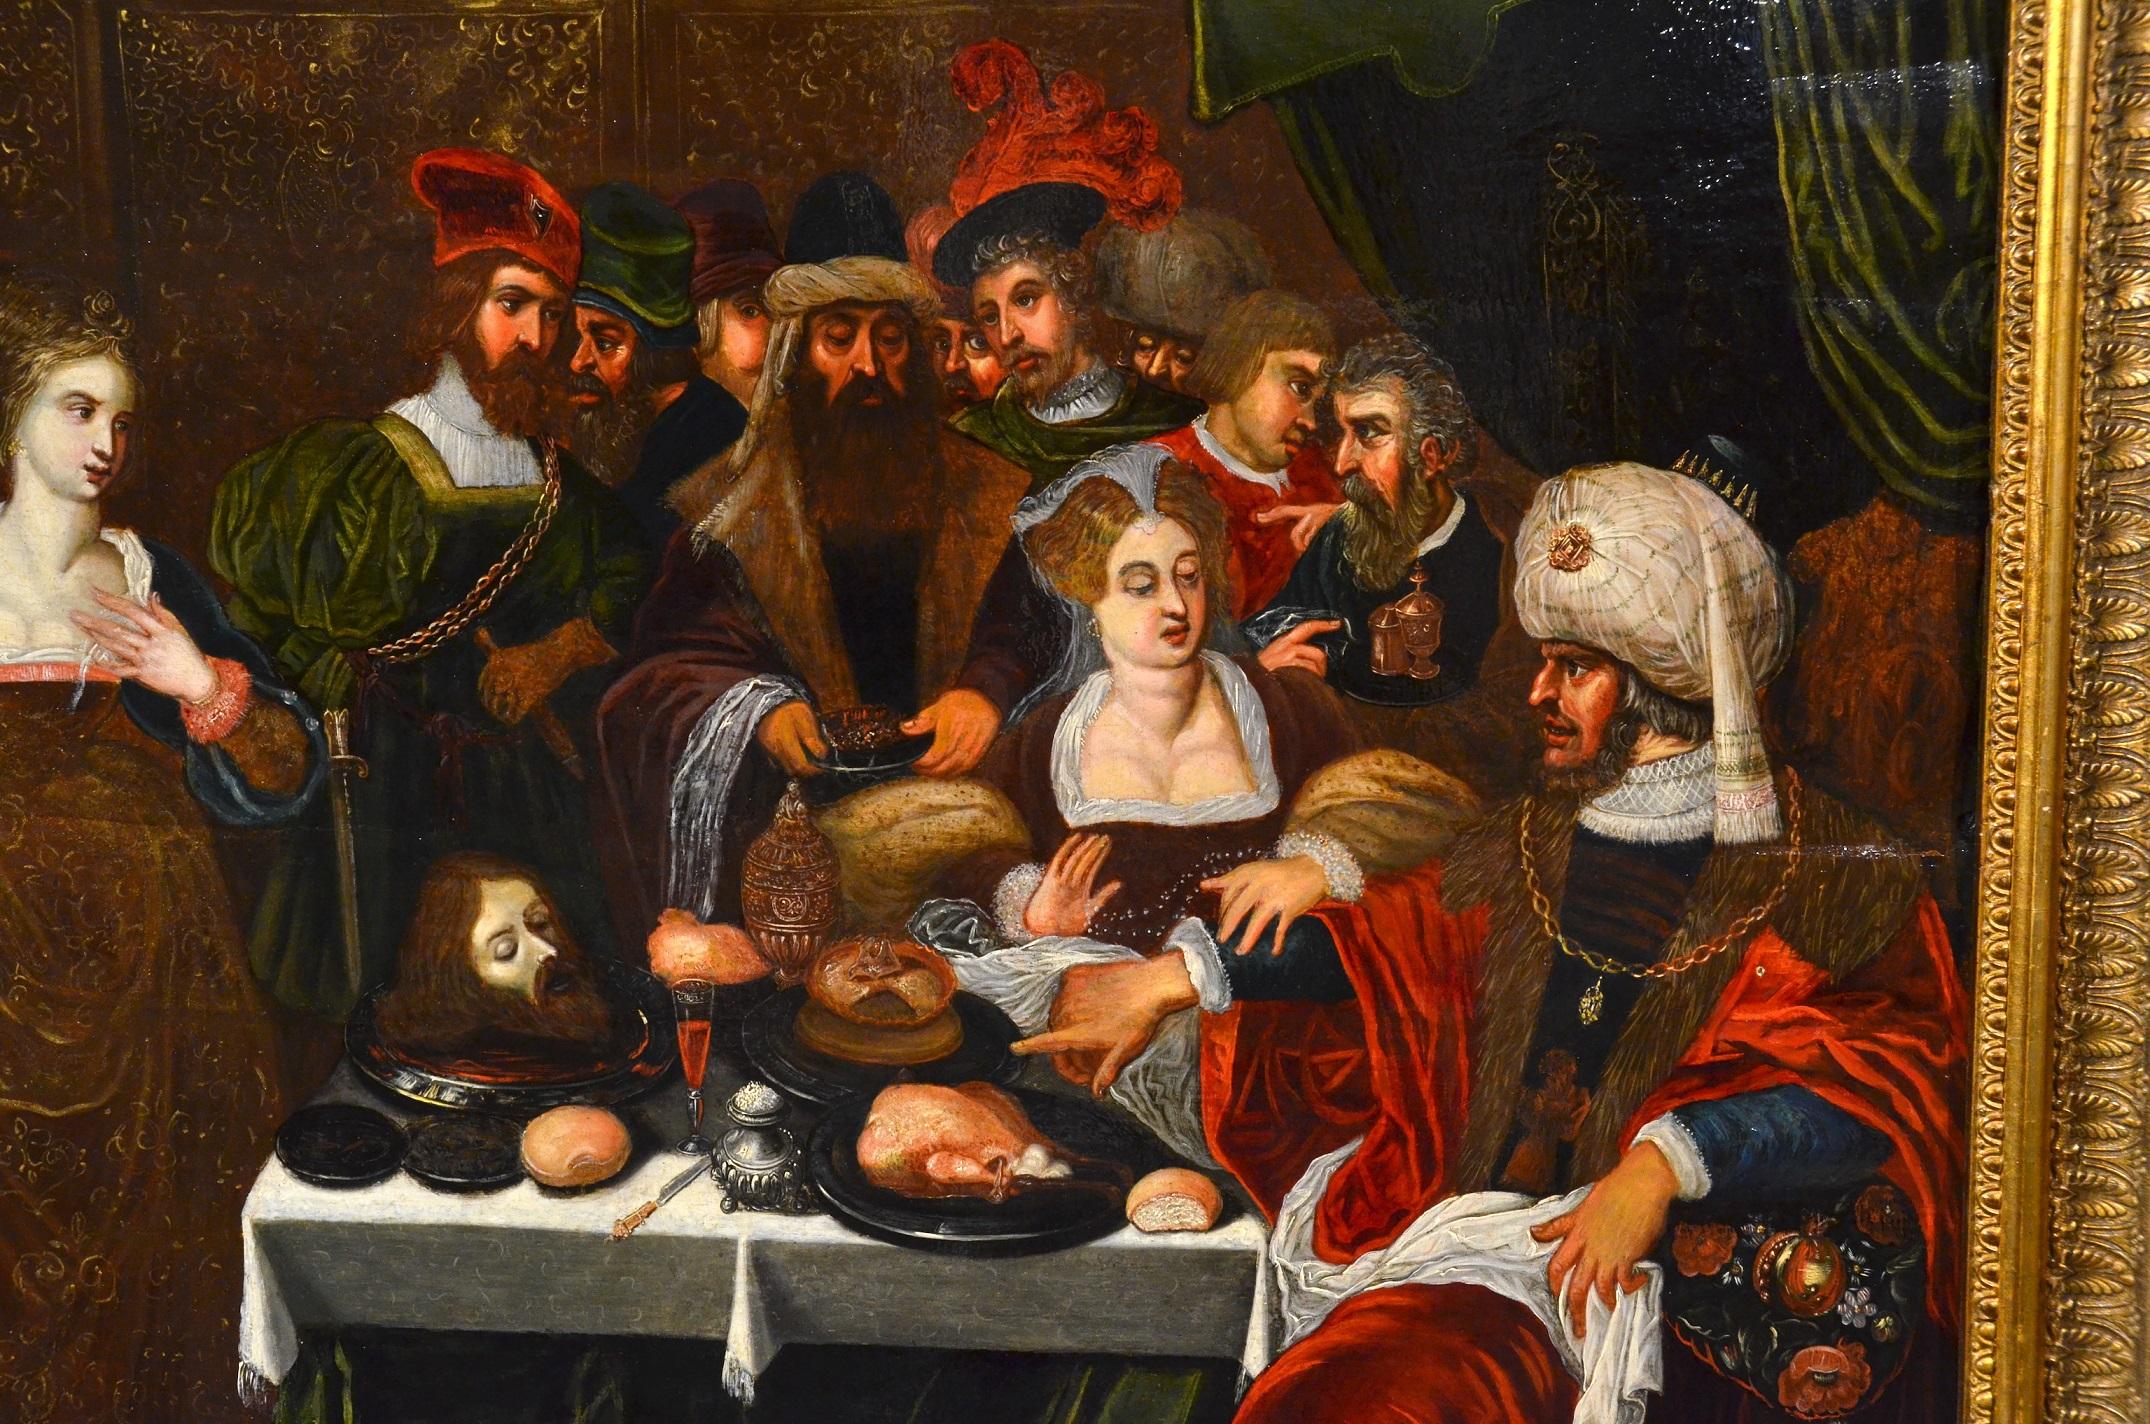 Gaspar van den Hoecke (Antwerp, 1585 - 1648)
Herod's banquet

Early 17th century
oil on panel, with gold highlights (in the guise of Salome and in the curtains of the building in the background)
56 x 80 cm.
framed 72 x 90 cm.

Note: The painting